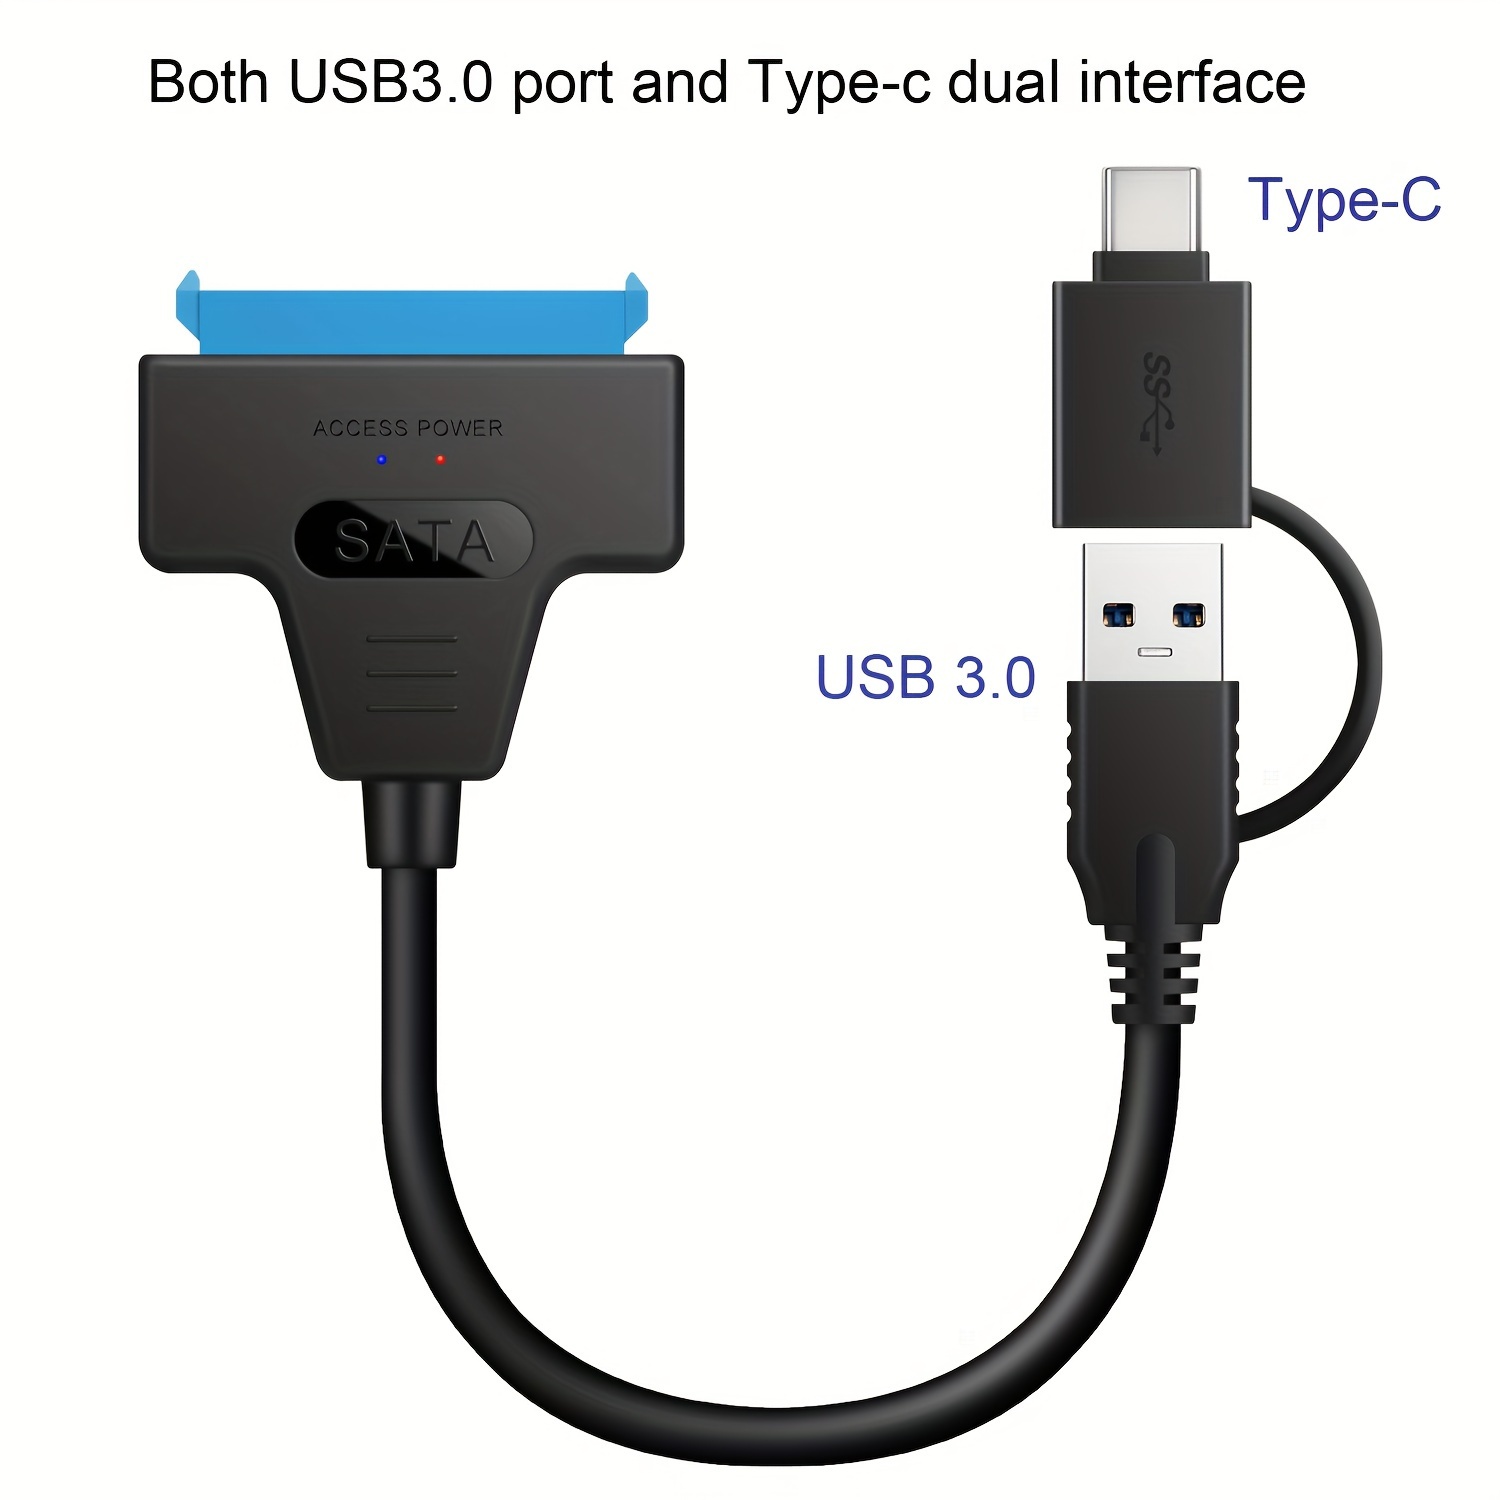 VCOM SATA to USB Adapter Cable for 2.5 inch SSD and HDD, USB 3.0 to SATA  III Hard Driver Adapter,Support UASP SATA to USB Cable SATA Adapter Cable  USB